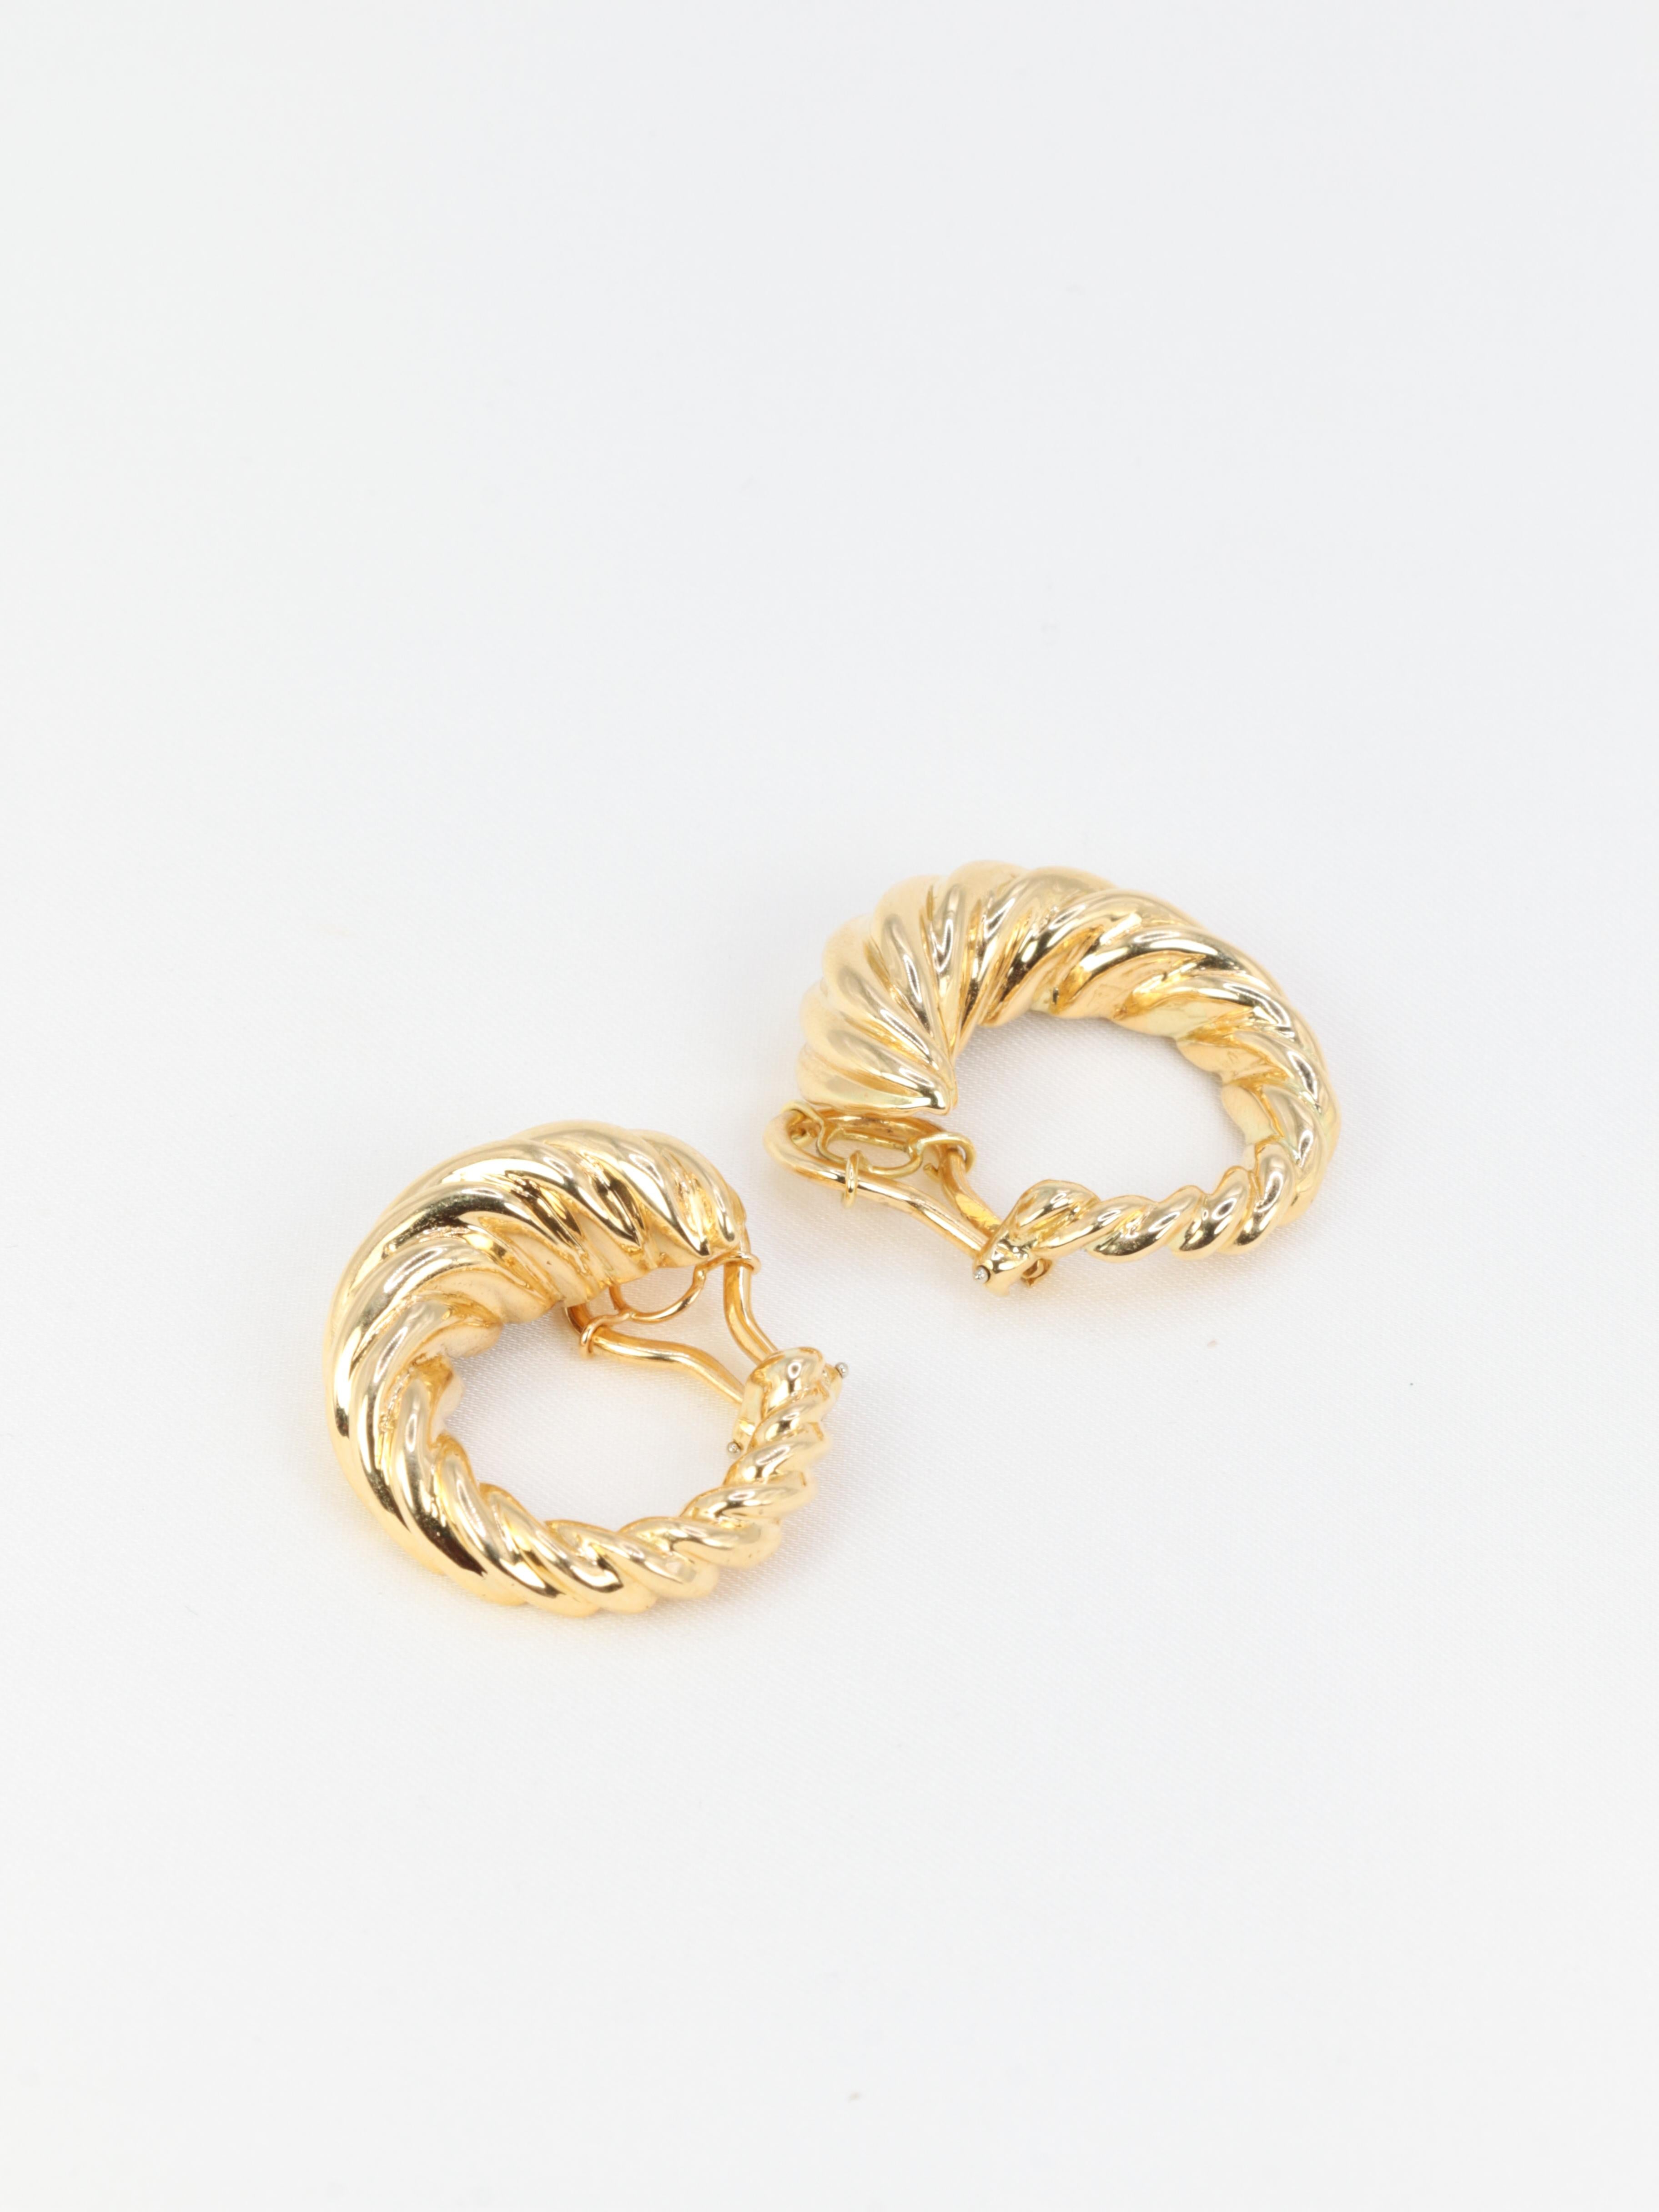 Earrings creoles vintage twisted in yellow gold 18k (750°/°°)
French work of the 1970s of excellent quality.
Trace of the maker's hallmark and presence of an eagle head hallmark for the 18k gold.

Excellent general condition, minimal scratches from